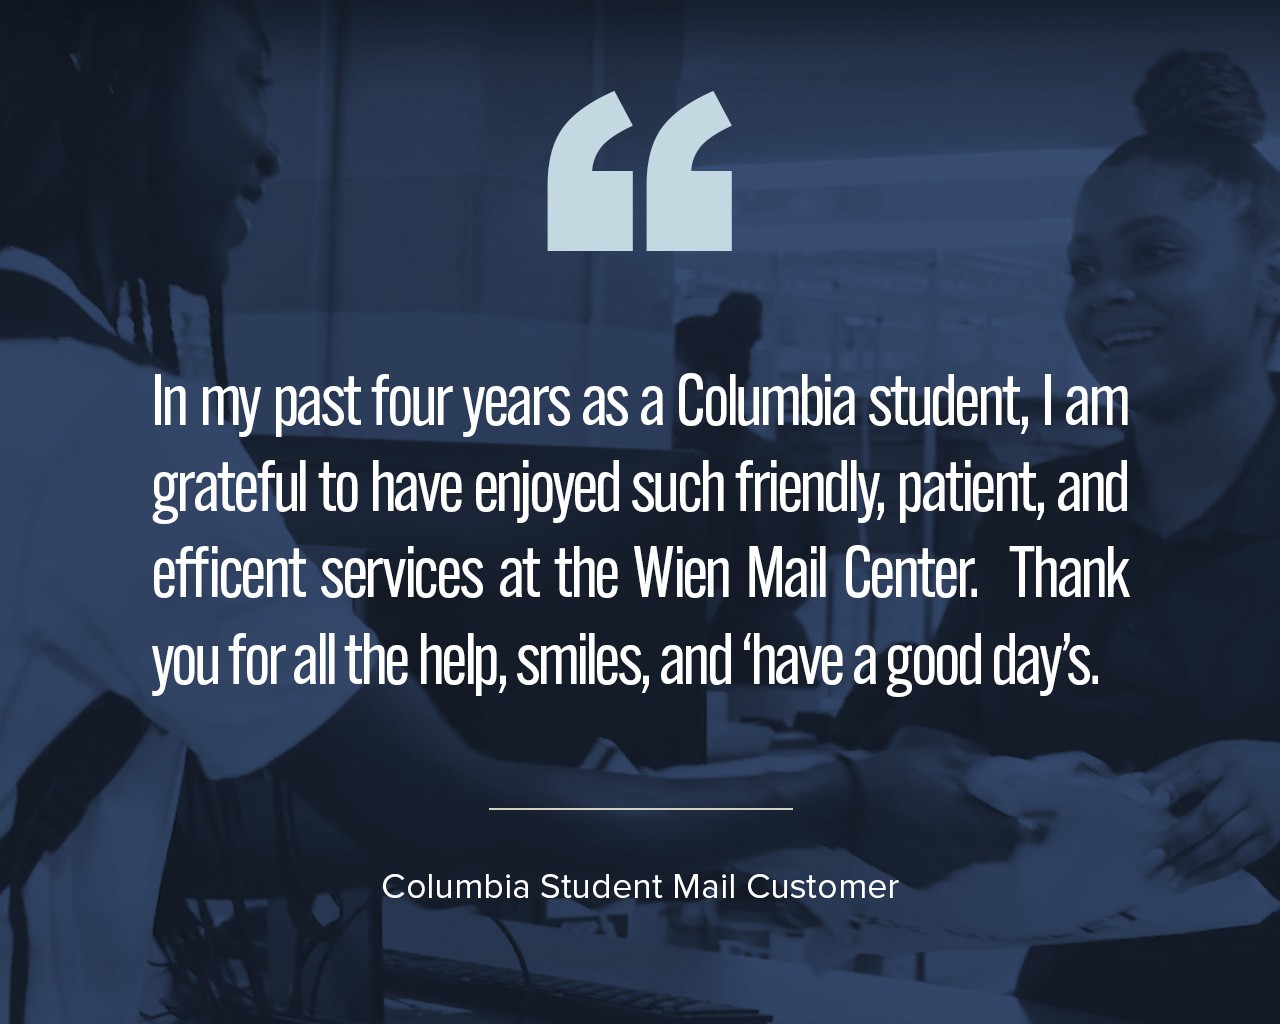 A quote that says, "In my past four years as a Columbia student, I am grateful to have enjoyed such friendly, patient, and efficent services at the Wien Mail Center.  Thank you for all the help, smiles, and ‘have a good day’s."